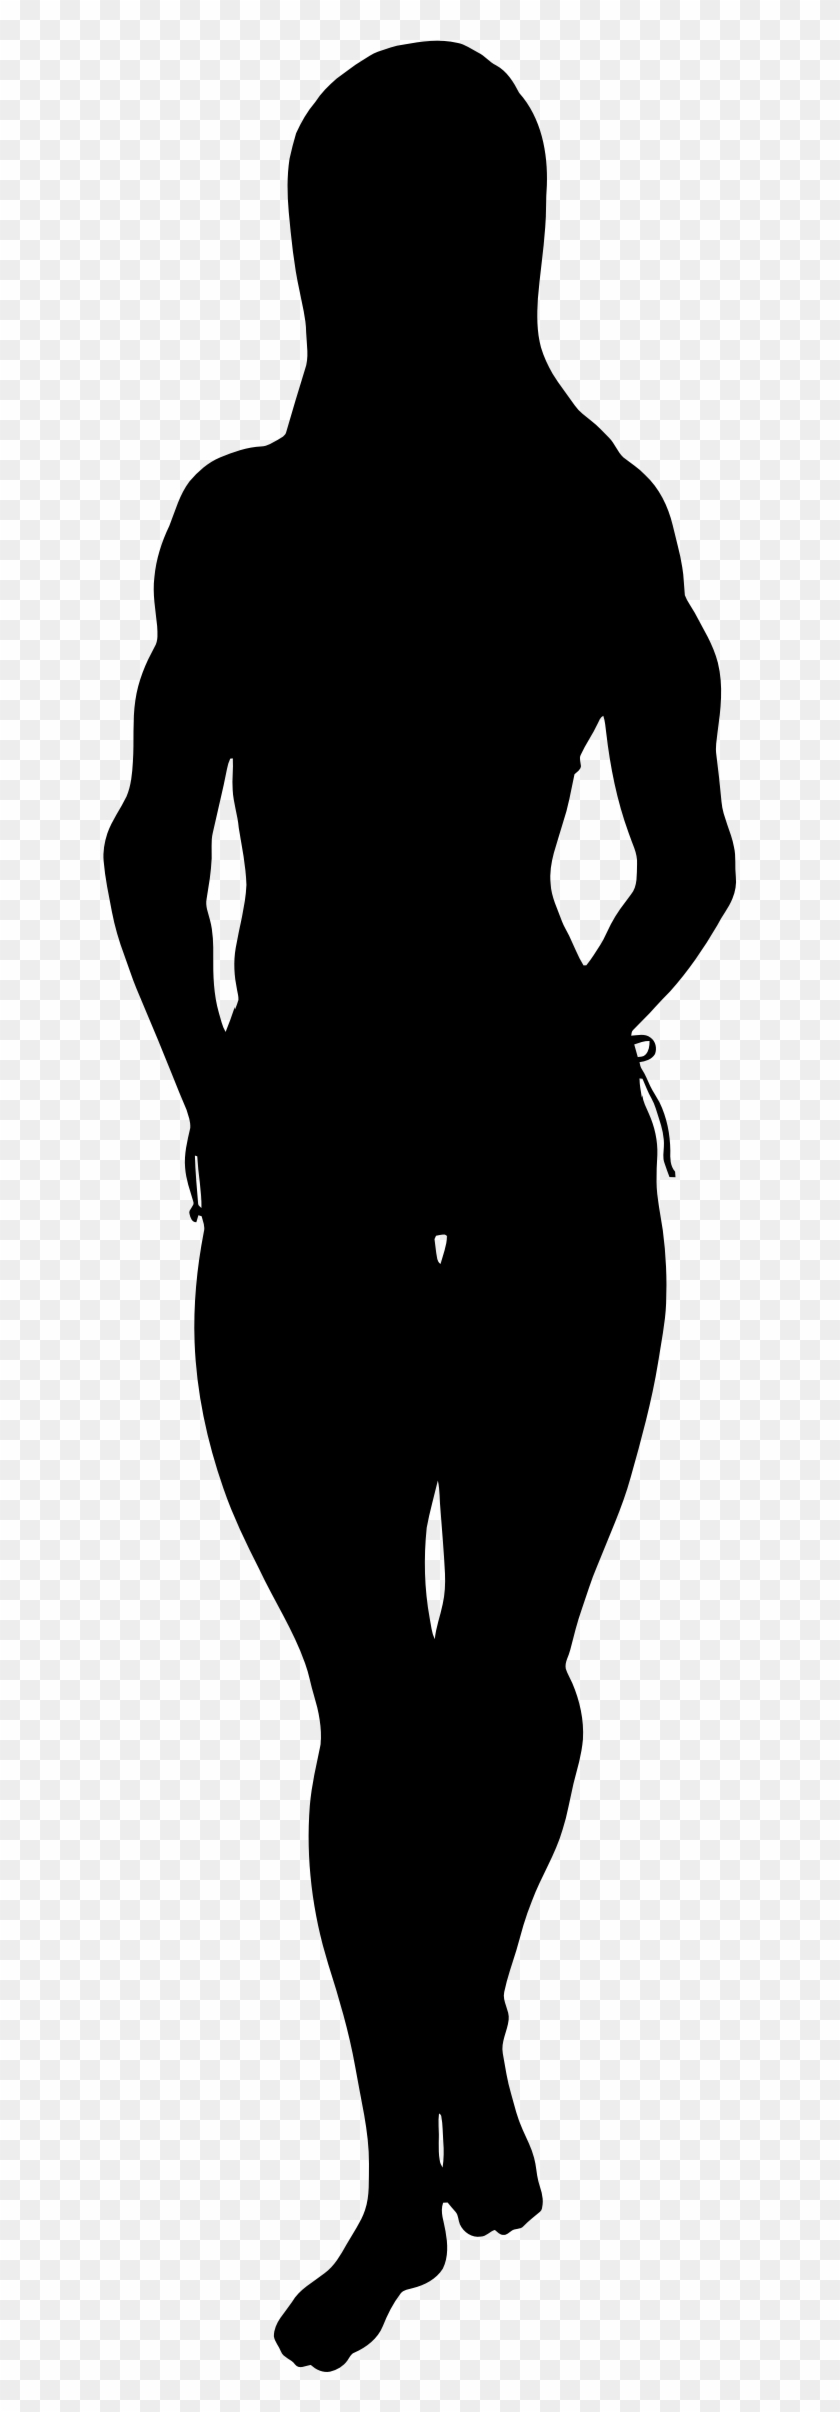 Female Bodybuilder Silhouette Clipart - Silhouette Of A Person Walking Away #799425